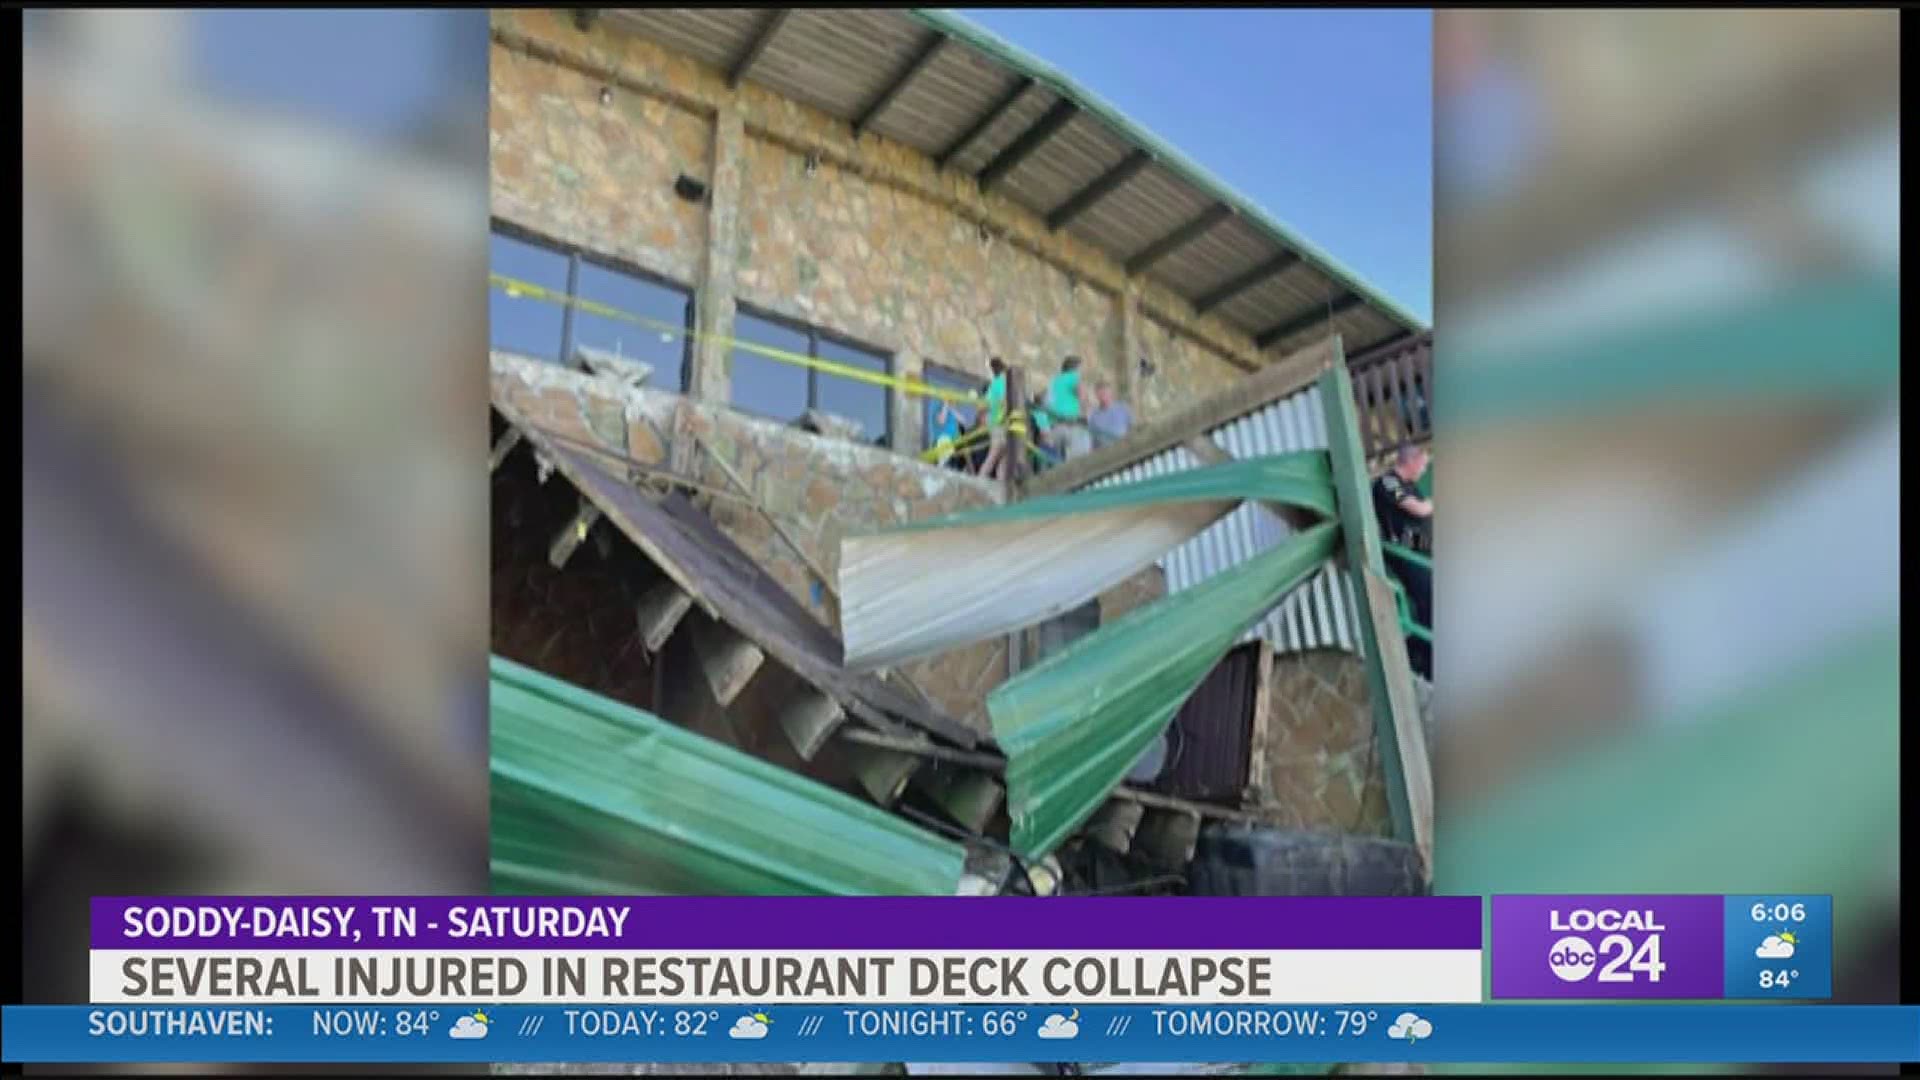 A spokeswoman for the Hamilton County Office of Emergency Management said about 40 people were on the deck for a picture at a birthday party when it collapsed